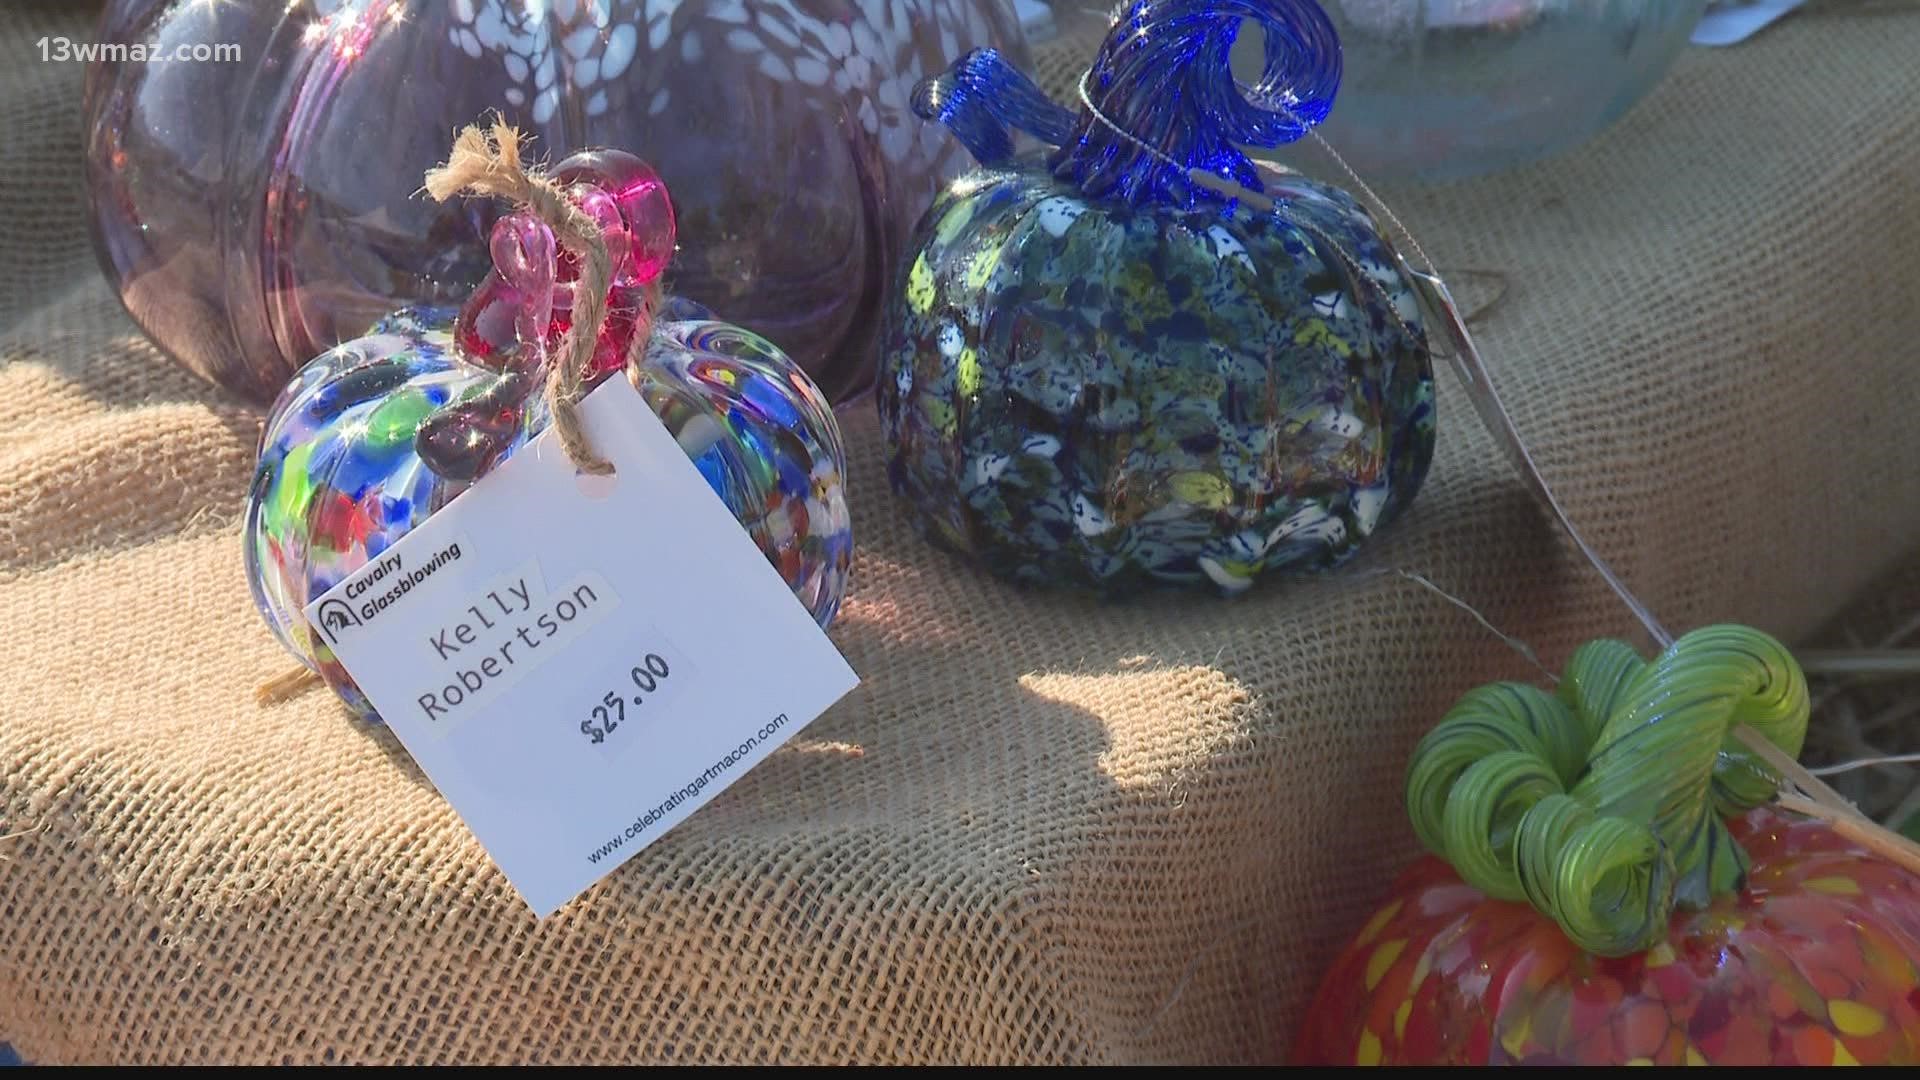 The event features over 1,000 glass pumpkins created by glassblowers from around the southeast.